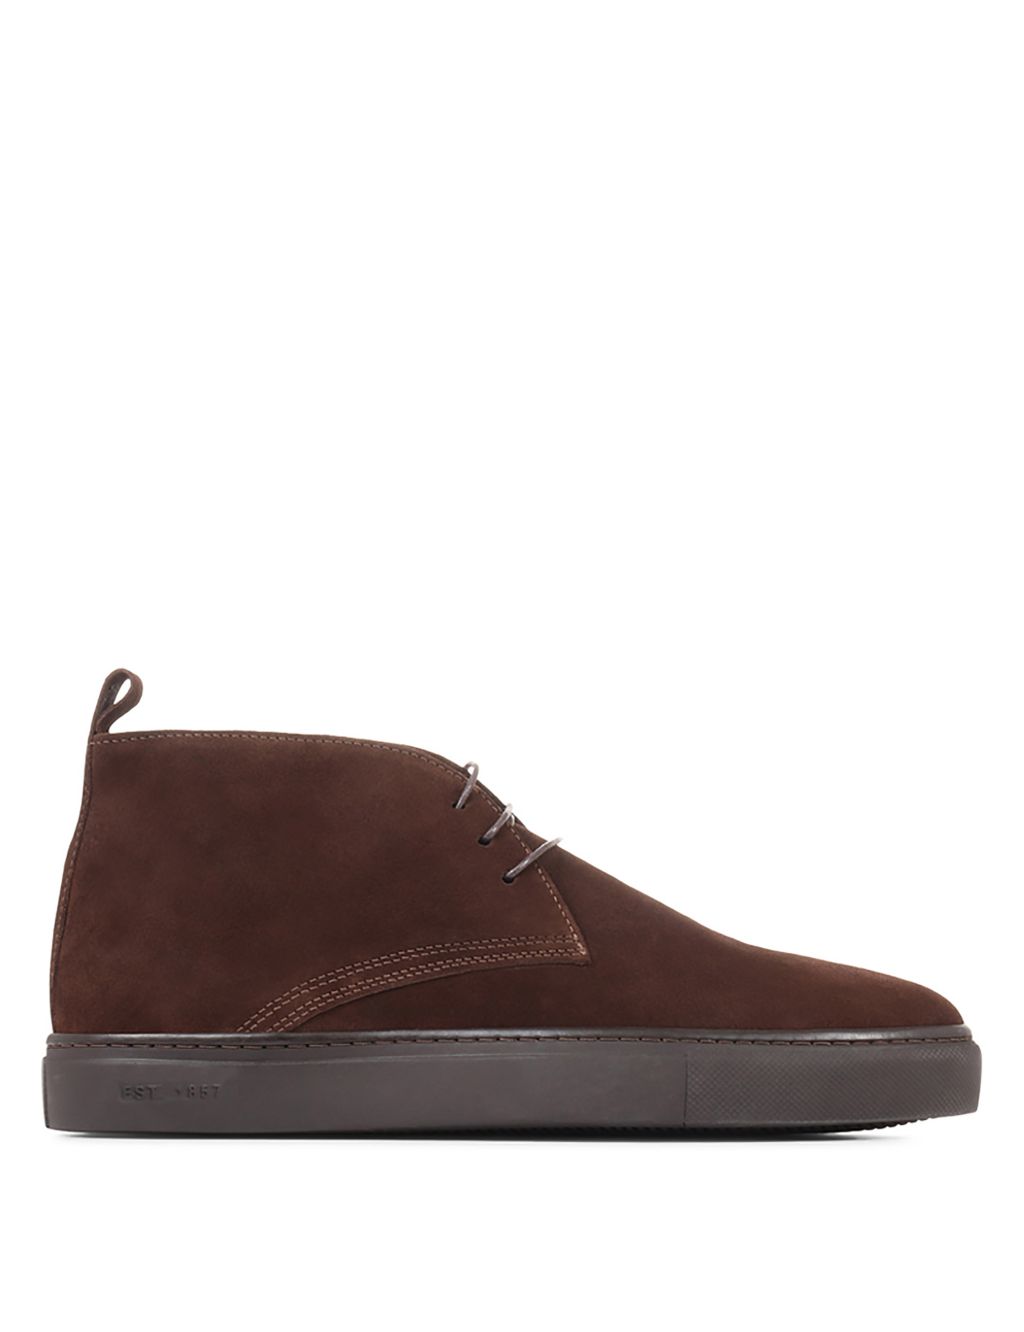 Suede Chukka Boots image 2